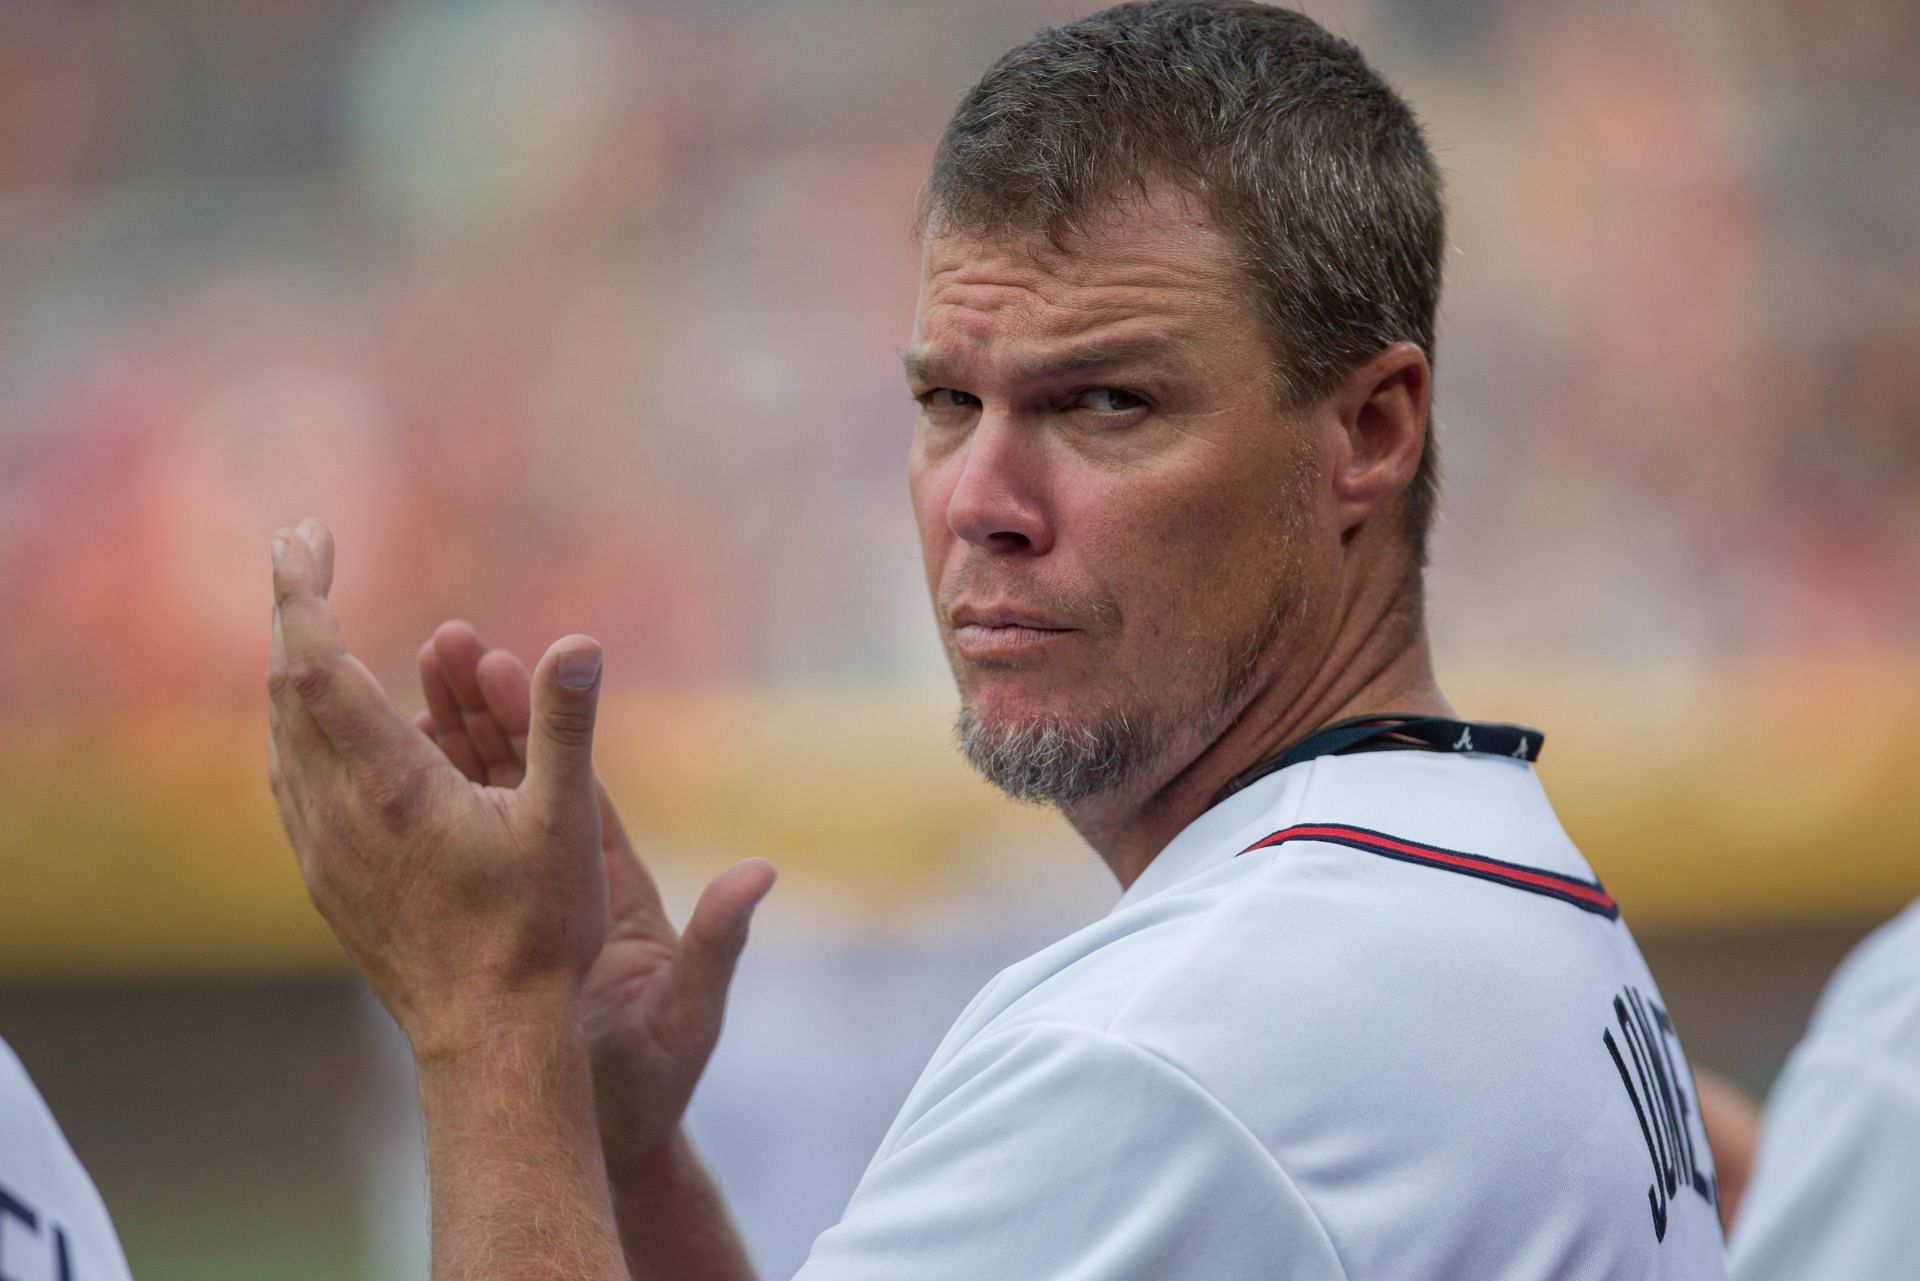 Washington Nationals v Atlanta Braves: ATLANTA, GA - AUGUST 8: Former Braves player Chipper Jones participates in a pre-game ceremony honoring many Braves alumni players prior to the game against the Washington Nationals at Turner Field on August 8, 2014, in Atlanta, Georgia. (Photo by Kevin Liles/Getty Images)